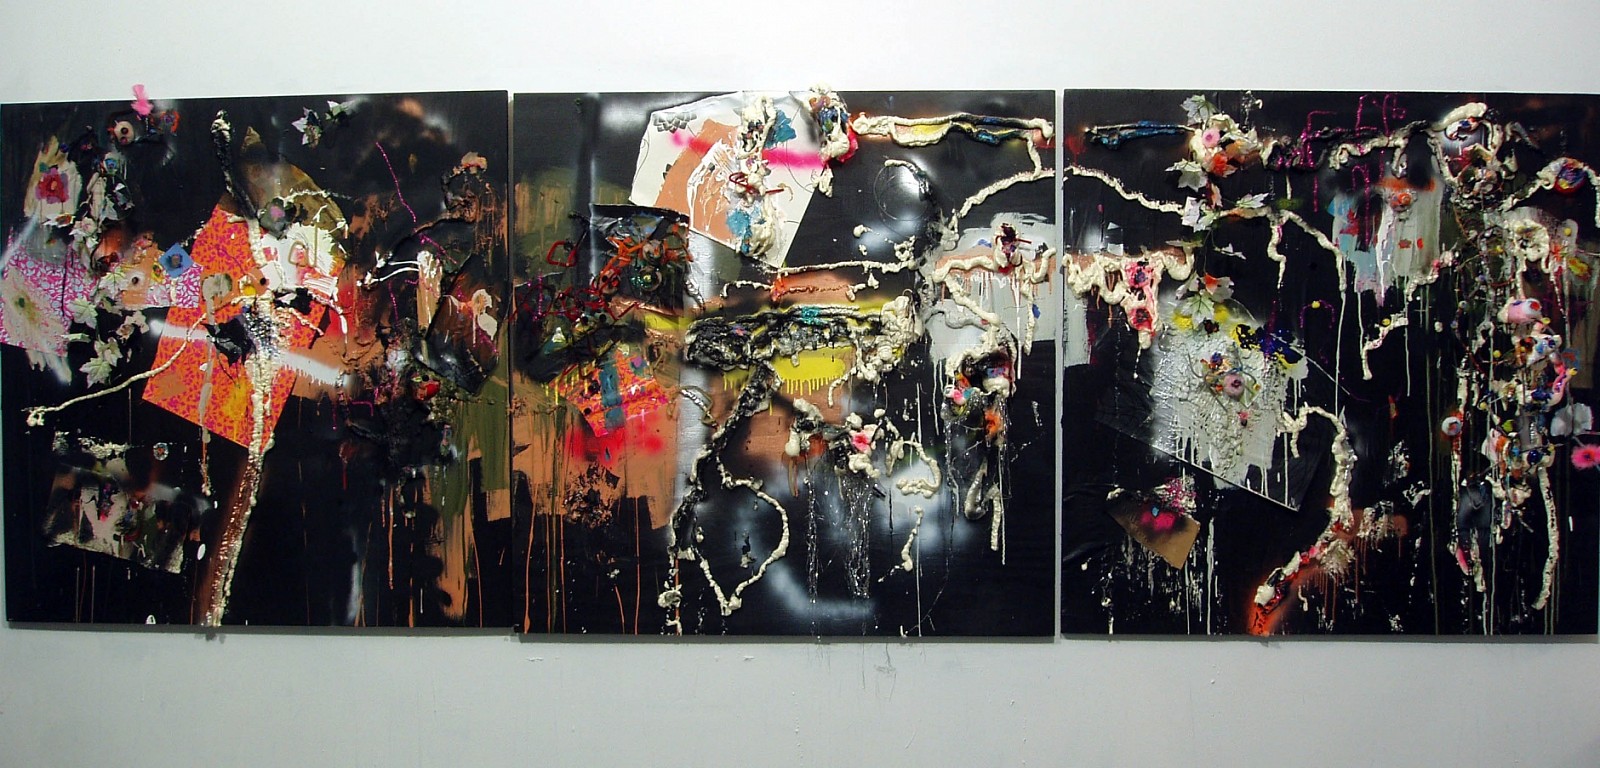 Elwyn Palmerton
And Then They All Died, 2007
mixed media, latex paint, spray paint, acrylic, tinsel, proof-balls, glitter, glitter glue, spray foam, found paper on plywood, 12 x 4 x 8 in.